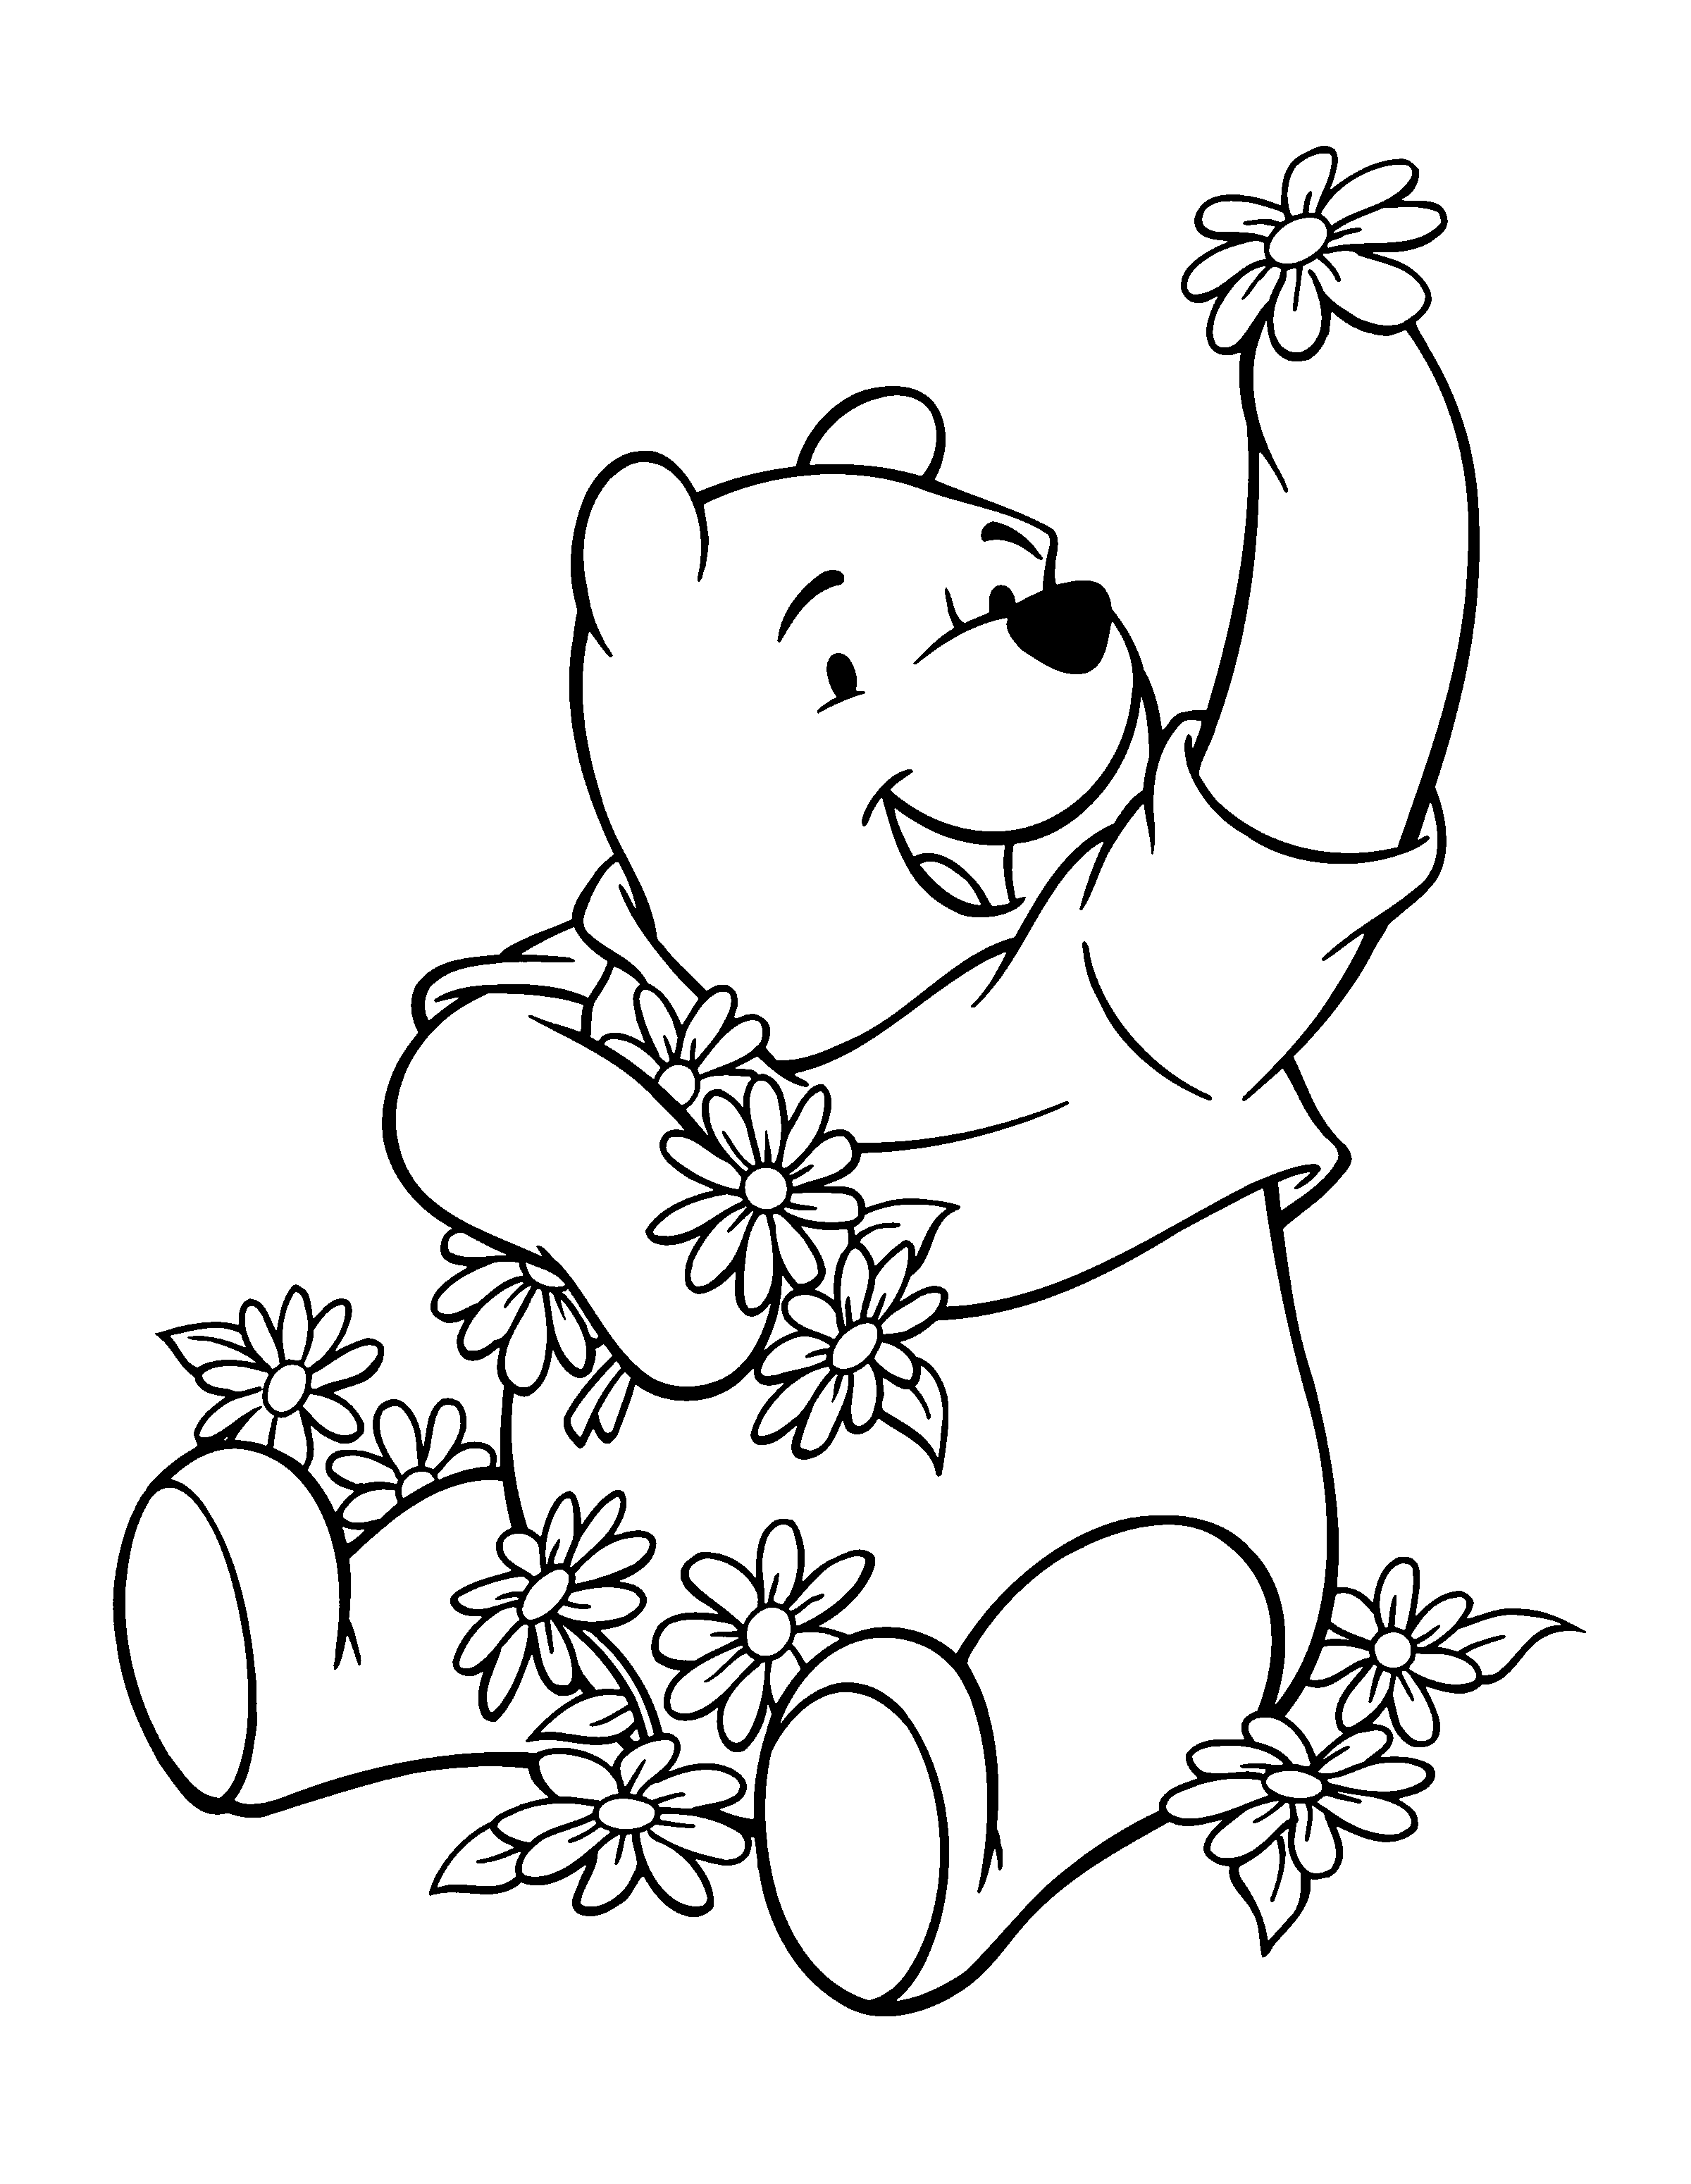 animated-coloring-pages-winnie-the-pooh-image-0101